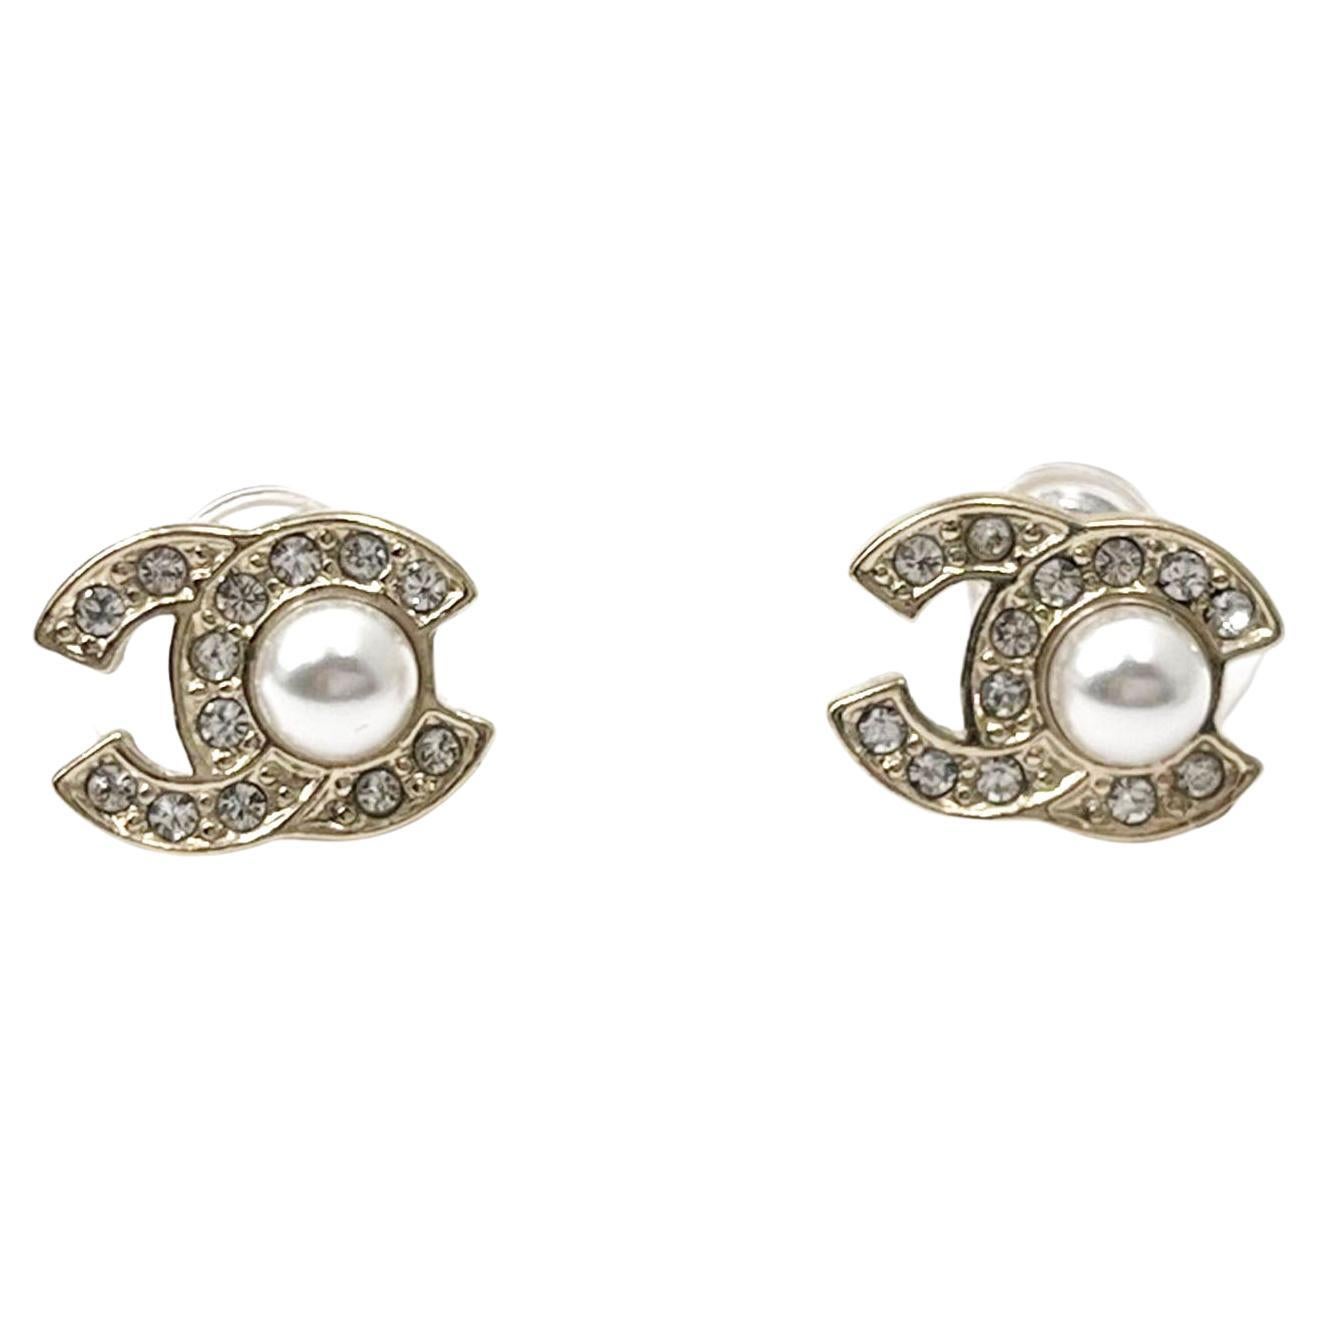 Chanel Brand New Gold CC Center Pearl Small Piercing Earrings 